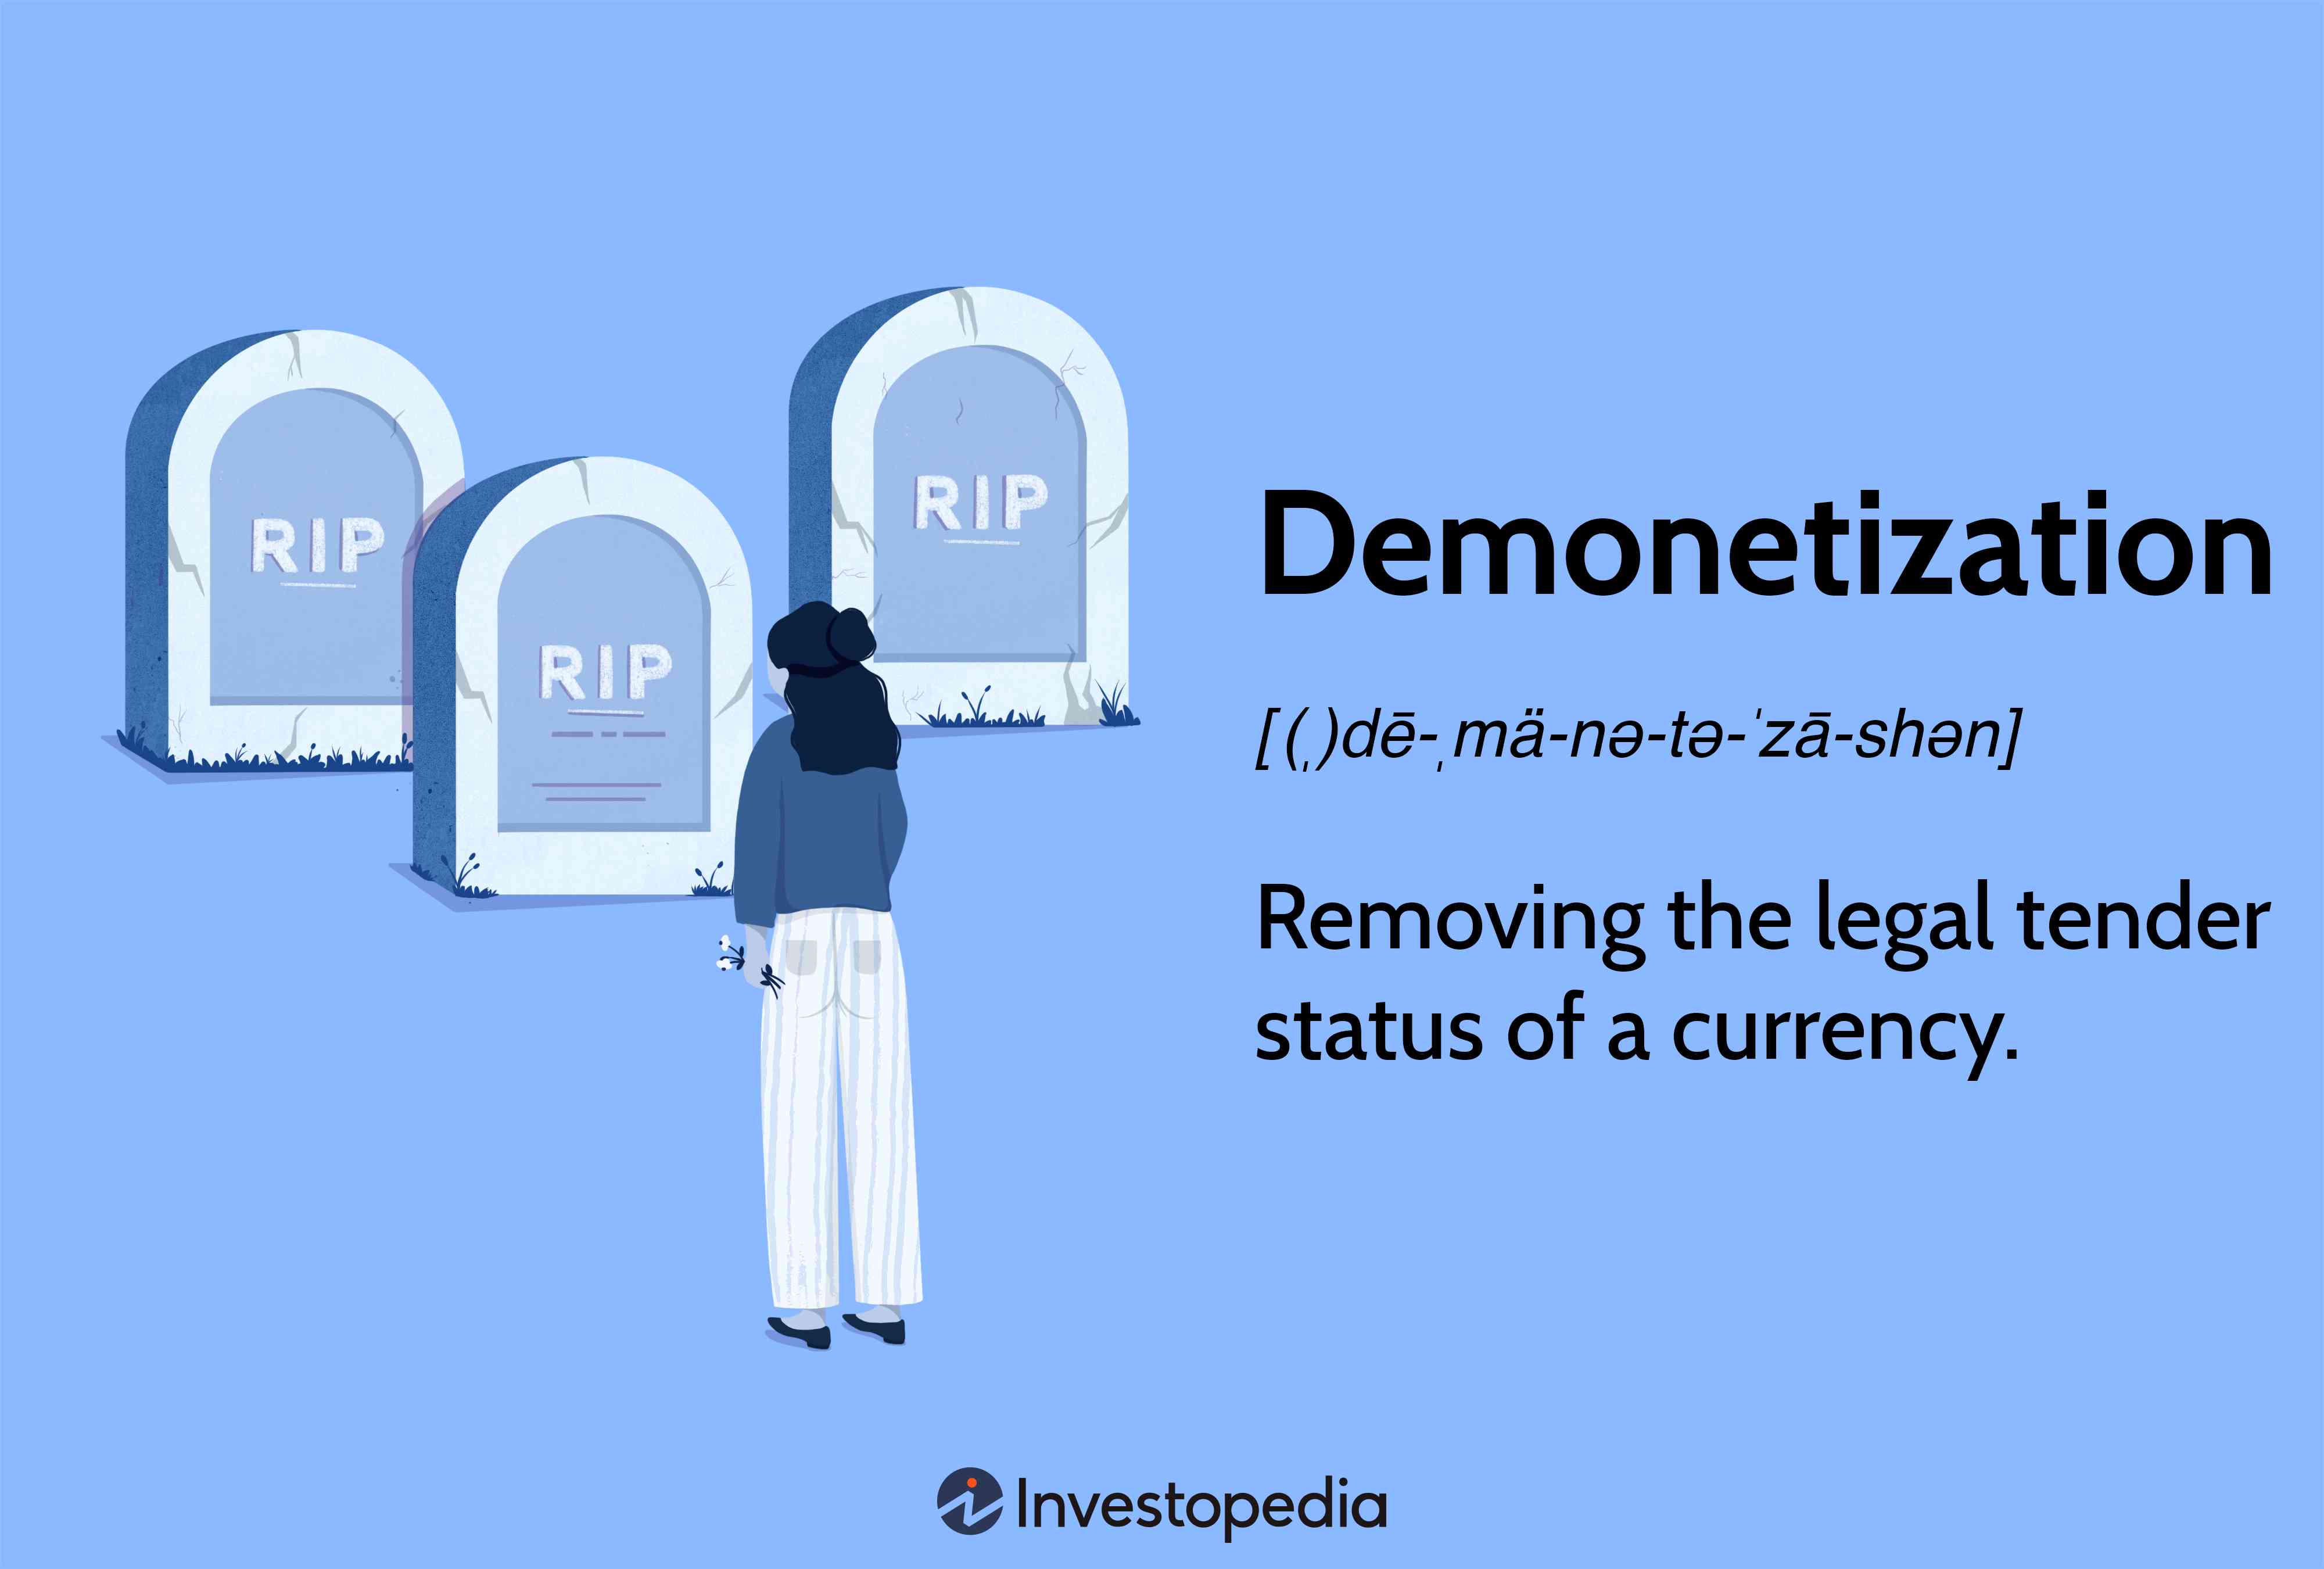 Demonetization: Removing the legal tender status of a currency.